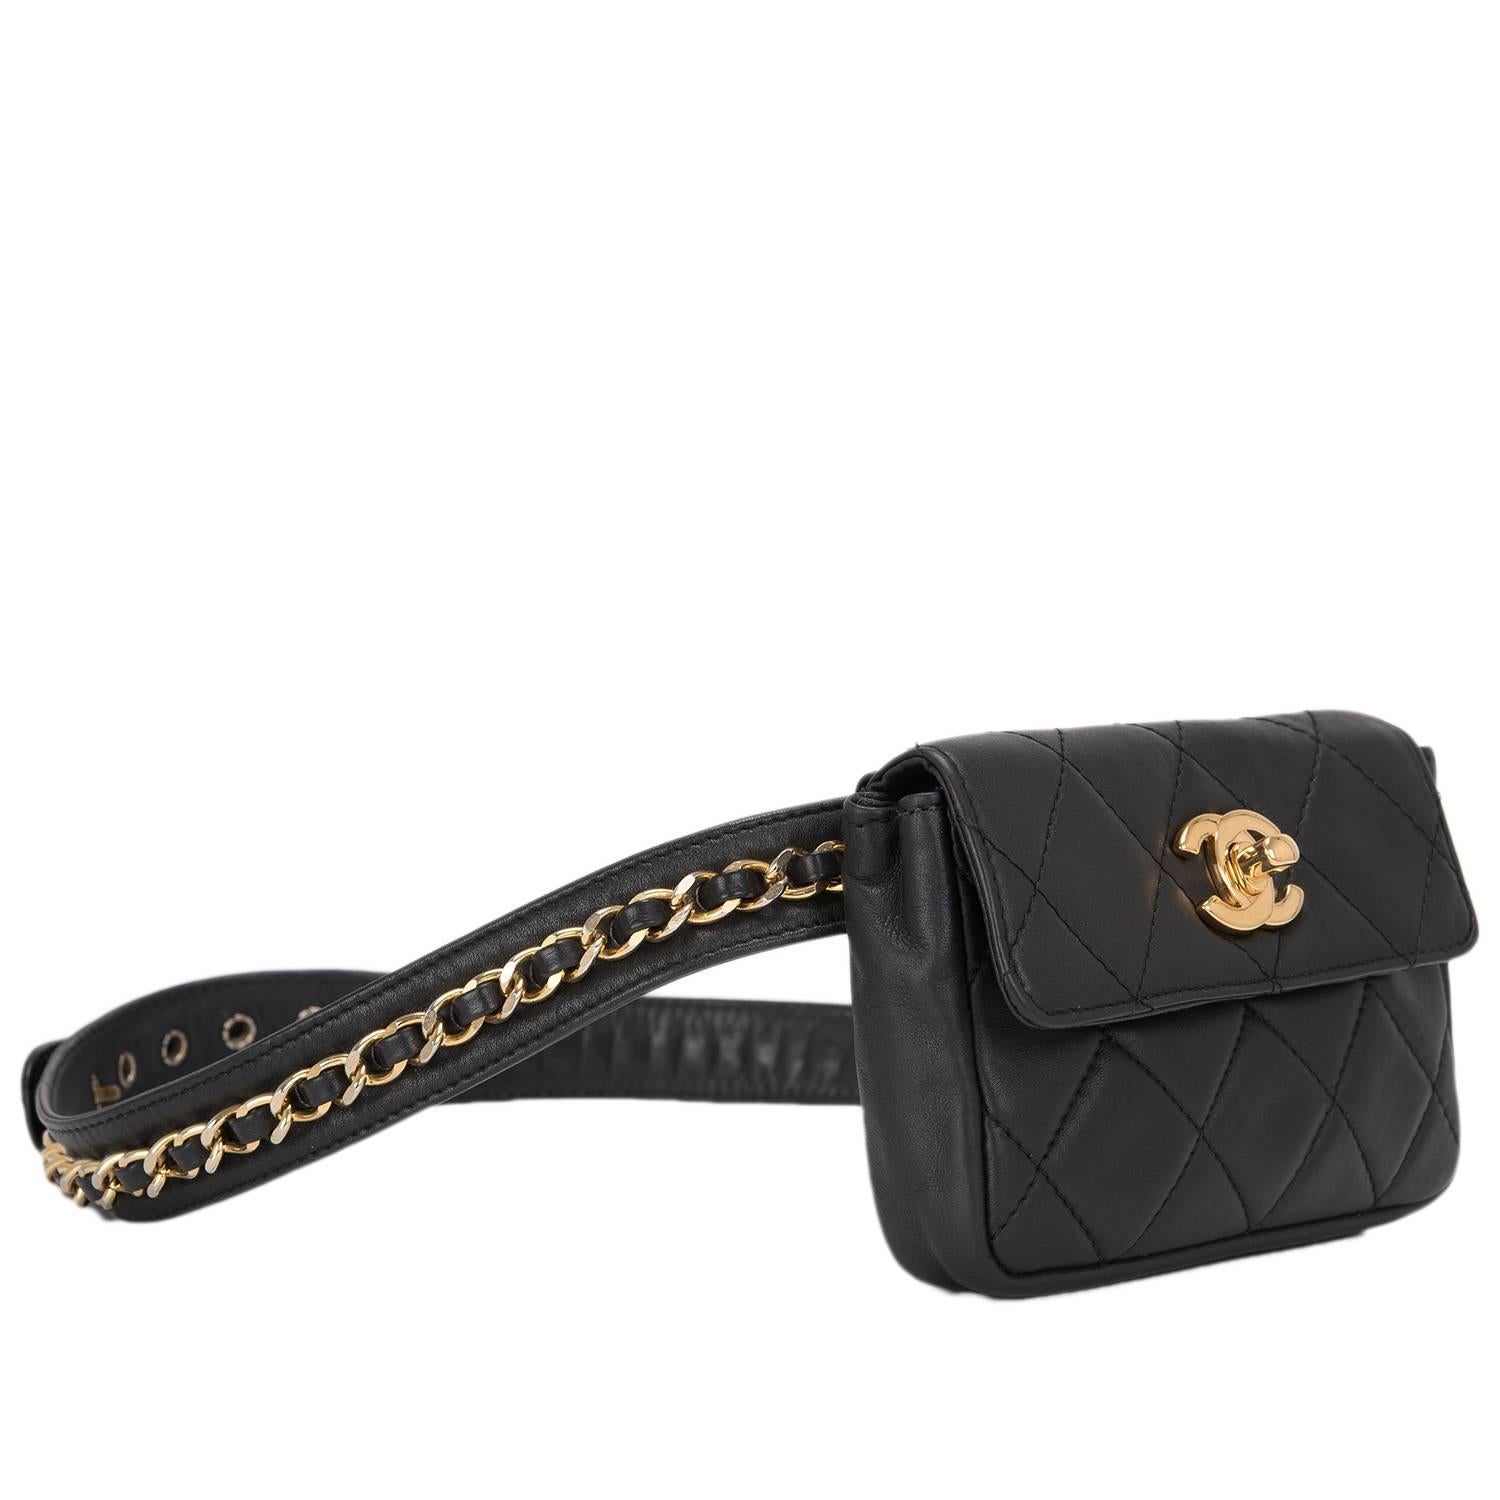 This Chanel vintage black quilted Iconic Chained Fanny Pack belt bag is made of lambskin and accented with gold tone hardware.

The bag feature a signature CC hardware closure and adjustable iconic chained leather belt.

The Interior is lined in